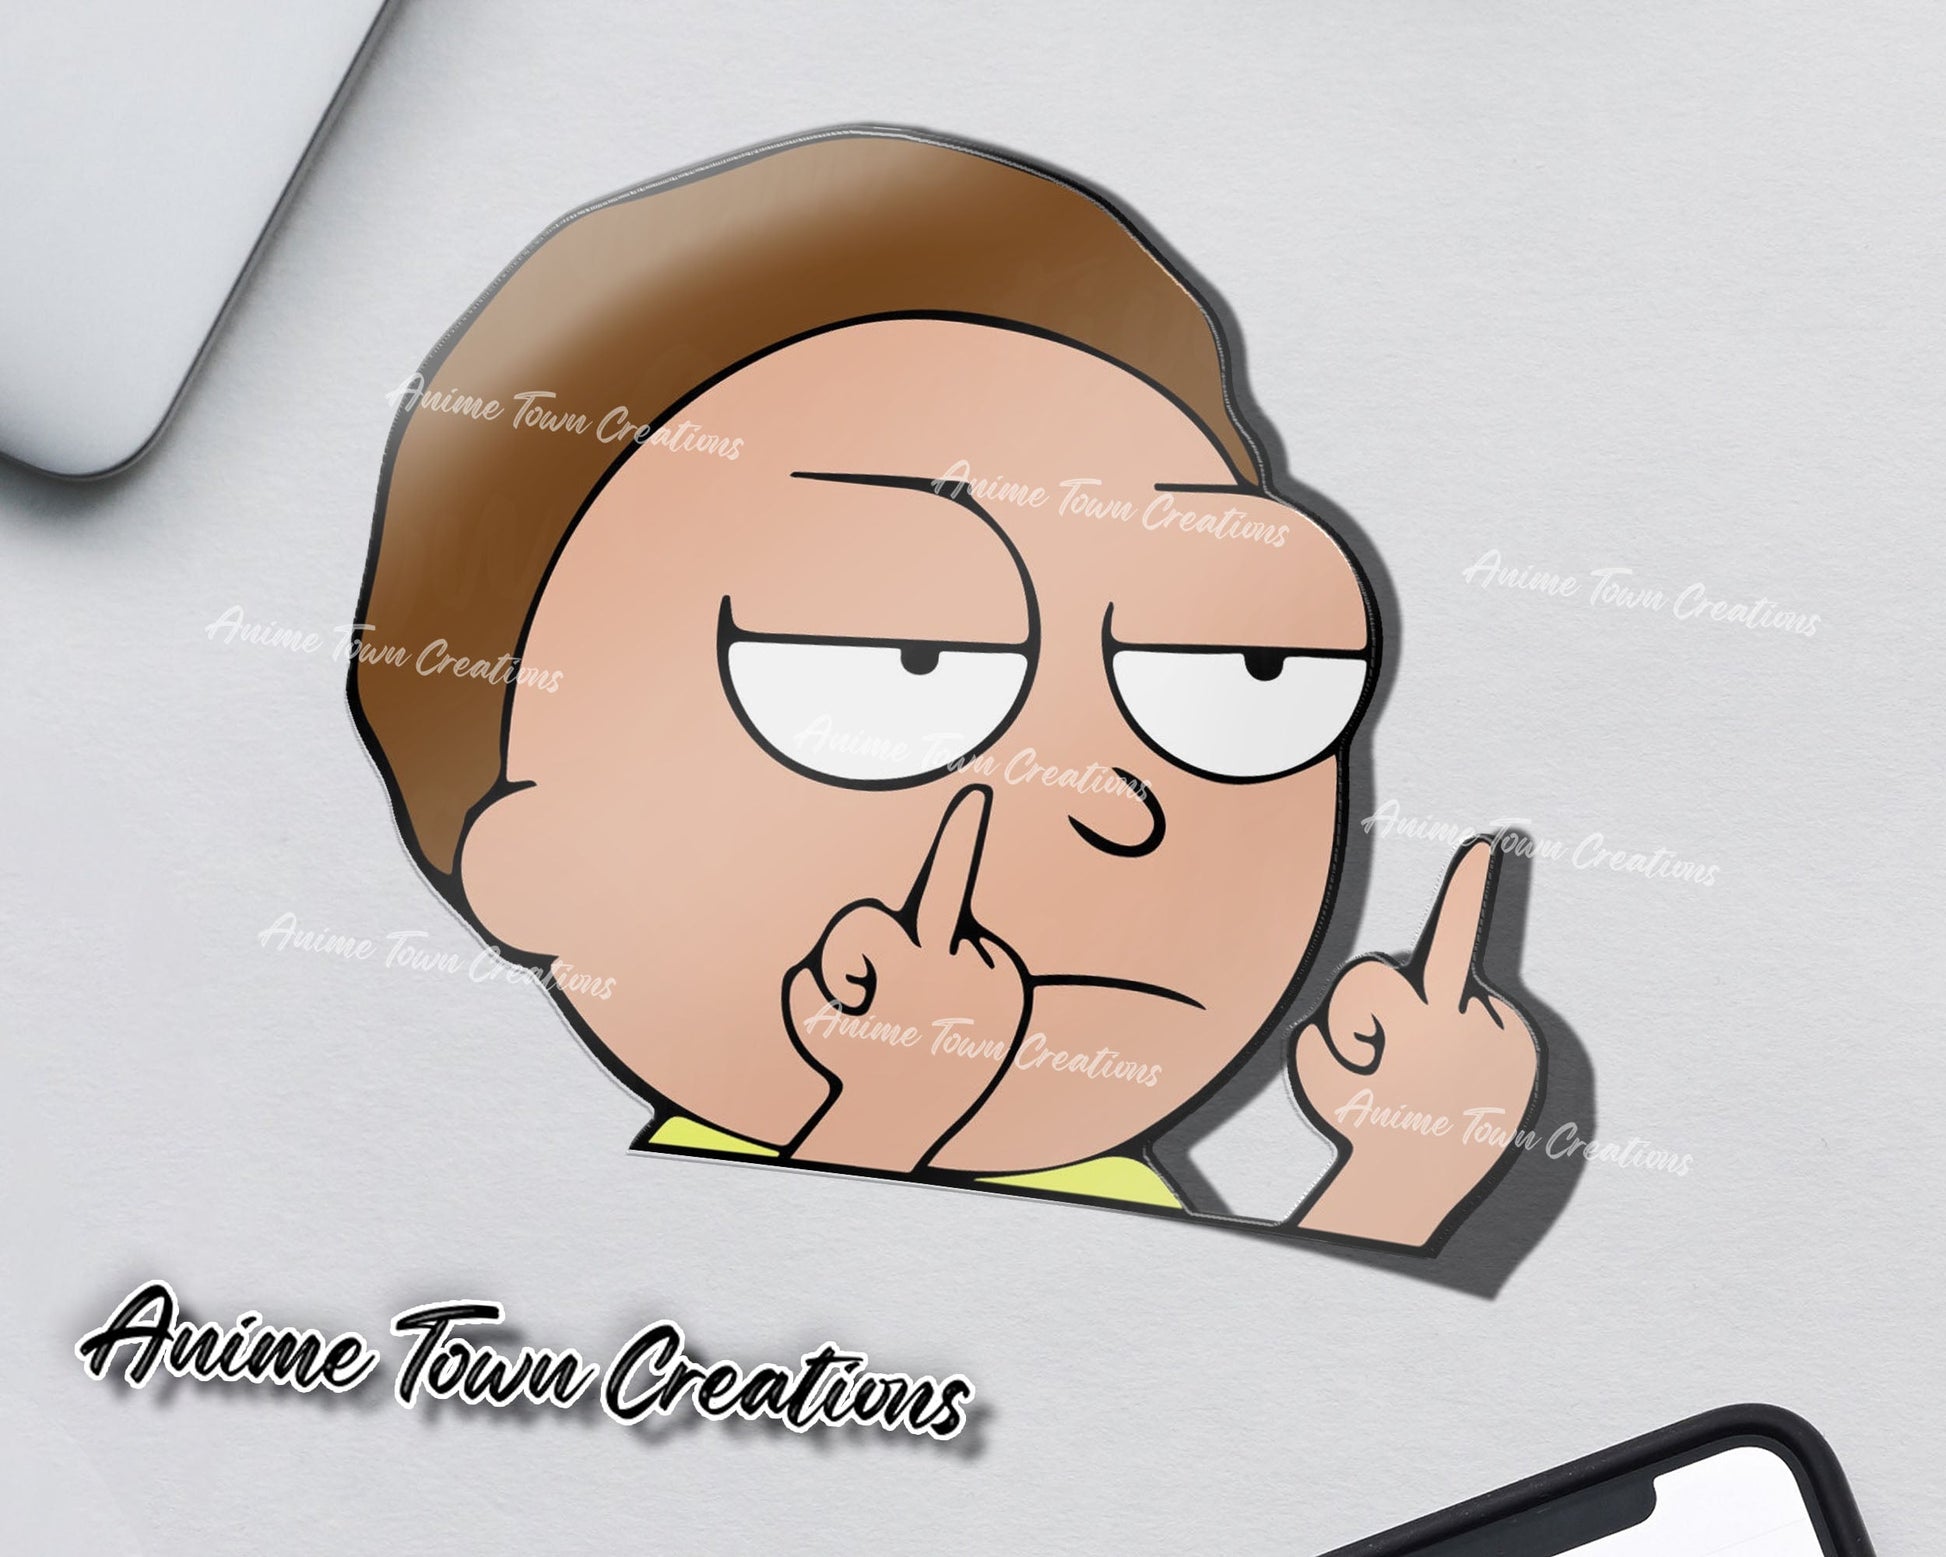 Sticker Mural Rick and Morty - Stickers Cartoons 